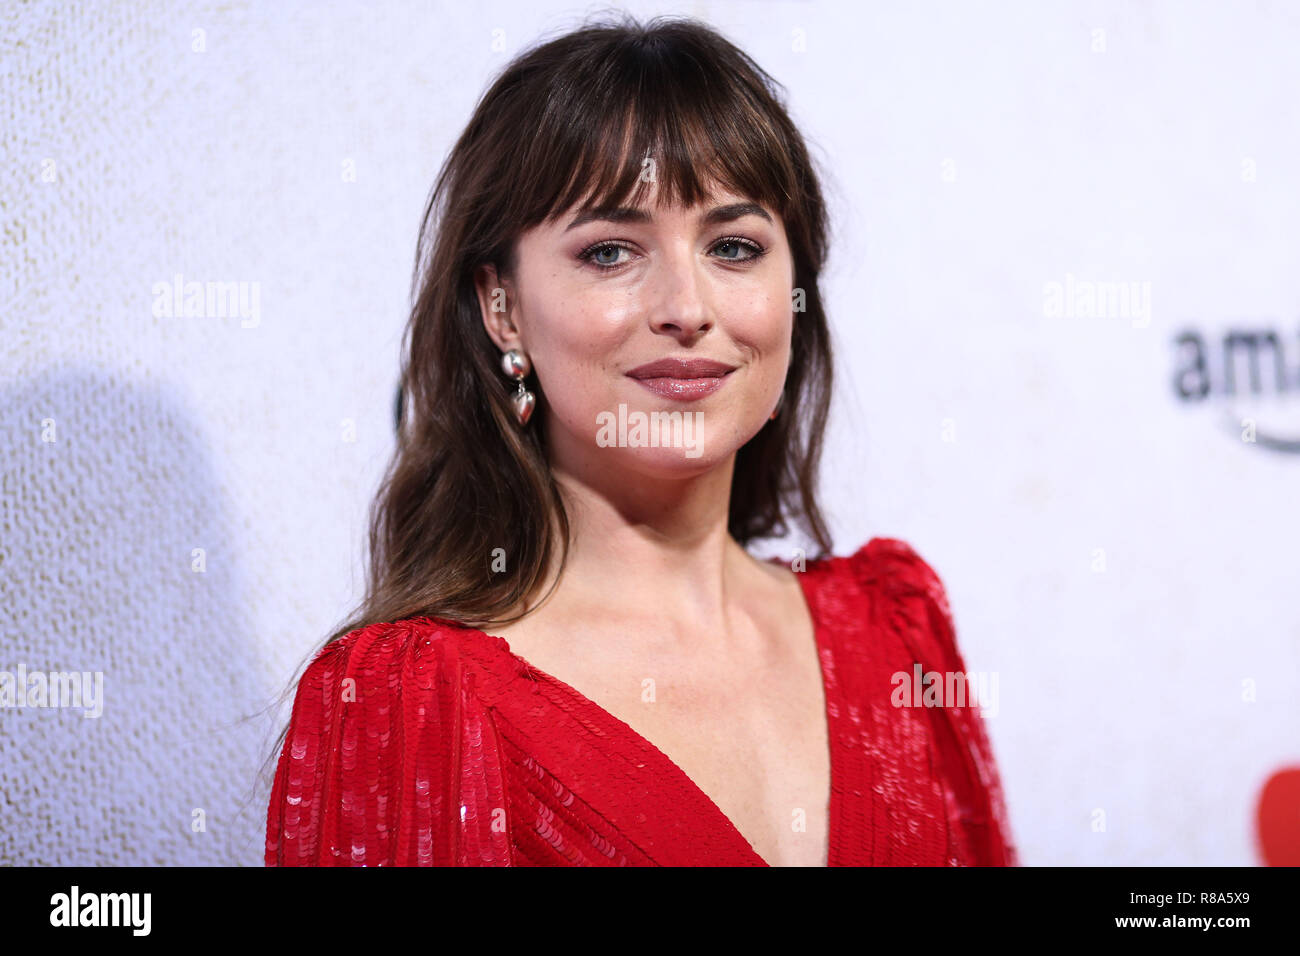 HOLLYWOOD, LOS ANGELES, CA, USA - OCTOBER 24: Actress Dakota Johnson wearing a Celine dress, Sophie Buhai earrings, and Giuseppe Zanotti heels arrives at the Los Angeles Premiere Of Amazon Studio's 'Suspiria' held at the ArcLight Cinerama Dome on October 24, 2018 in Hollywood, Los Angeles, California, United States. (Photo by Xavier Collin/Image Press Agency) Stock Photo